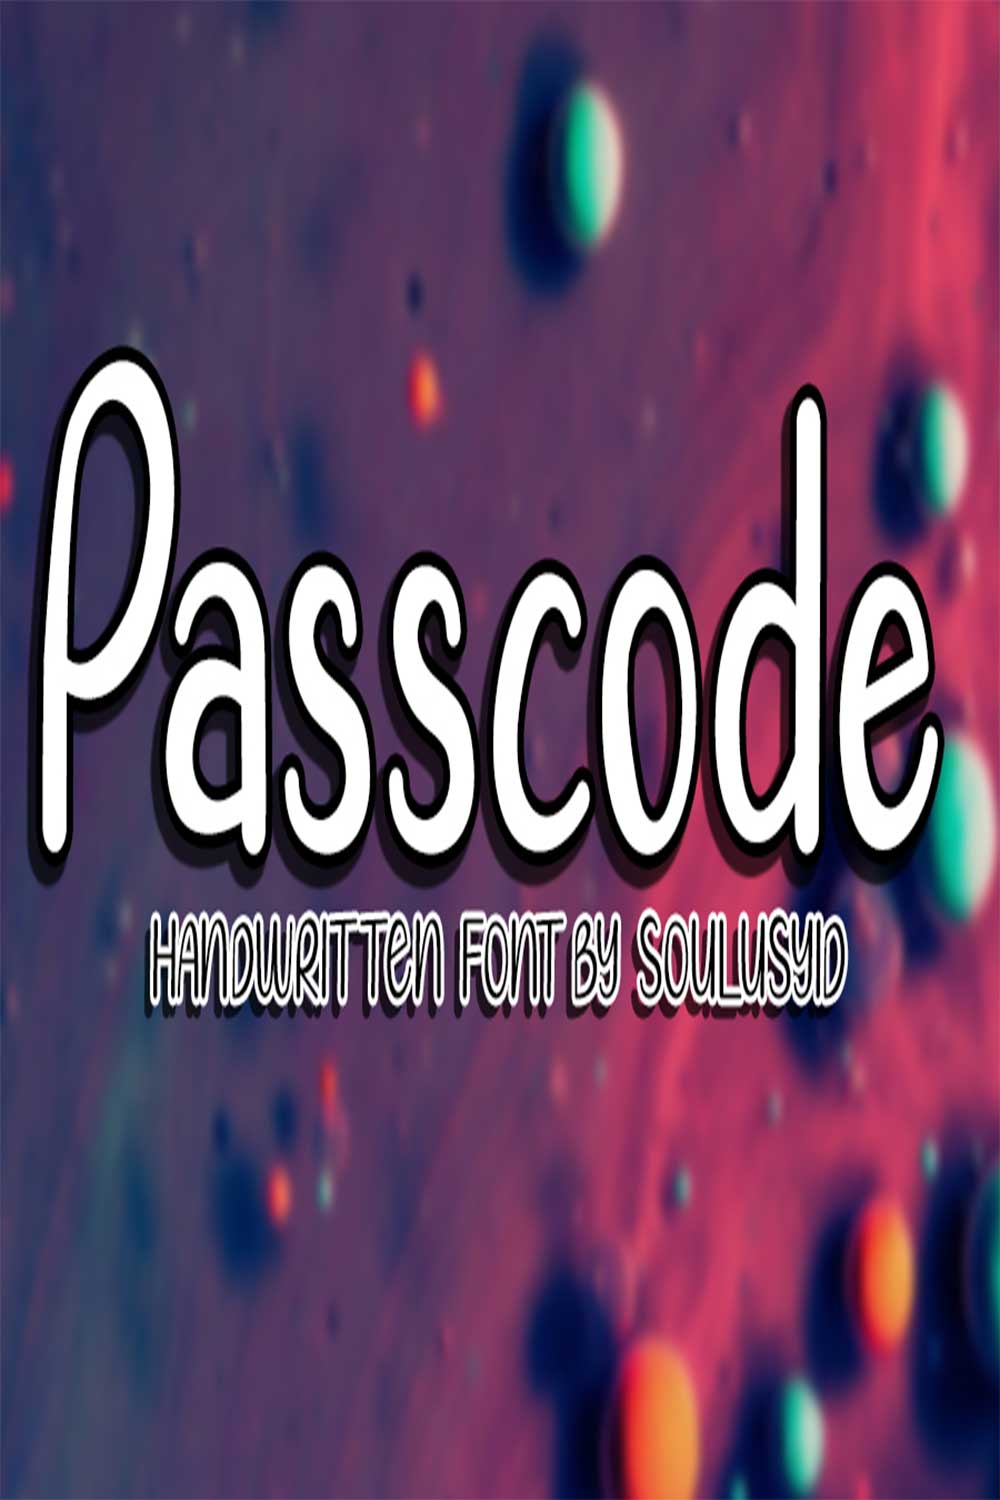 Passcode pinterest preview image.